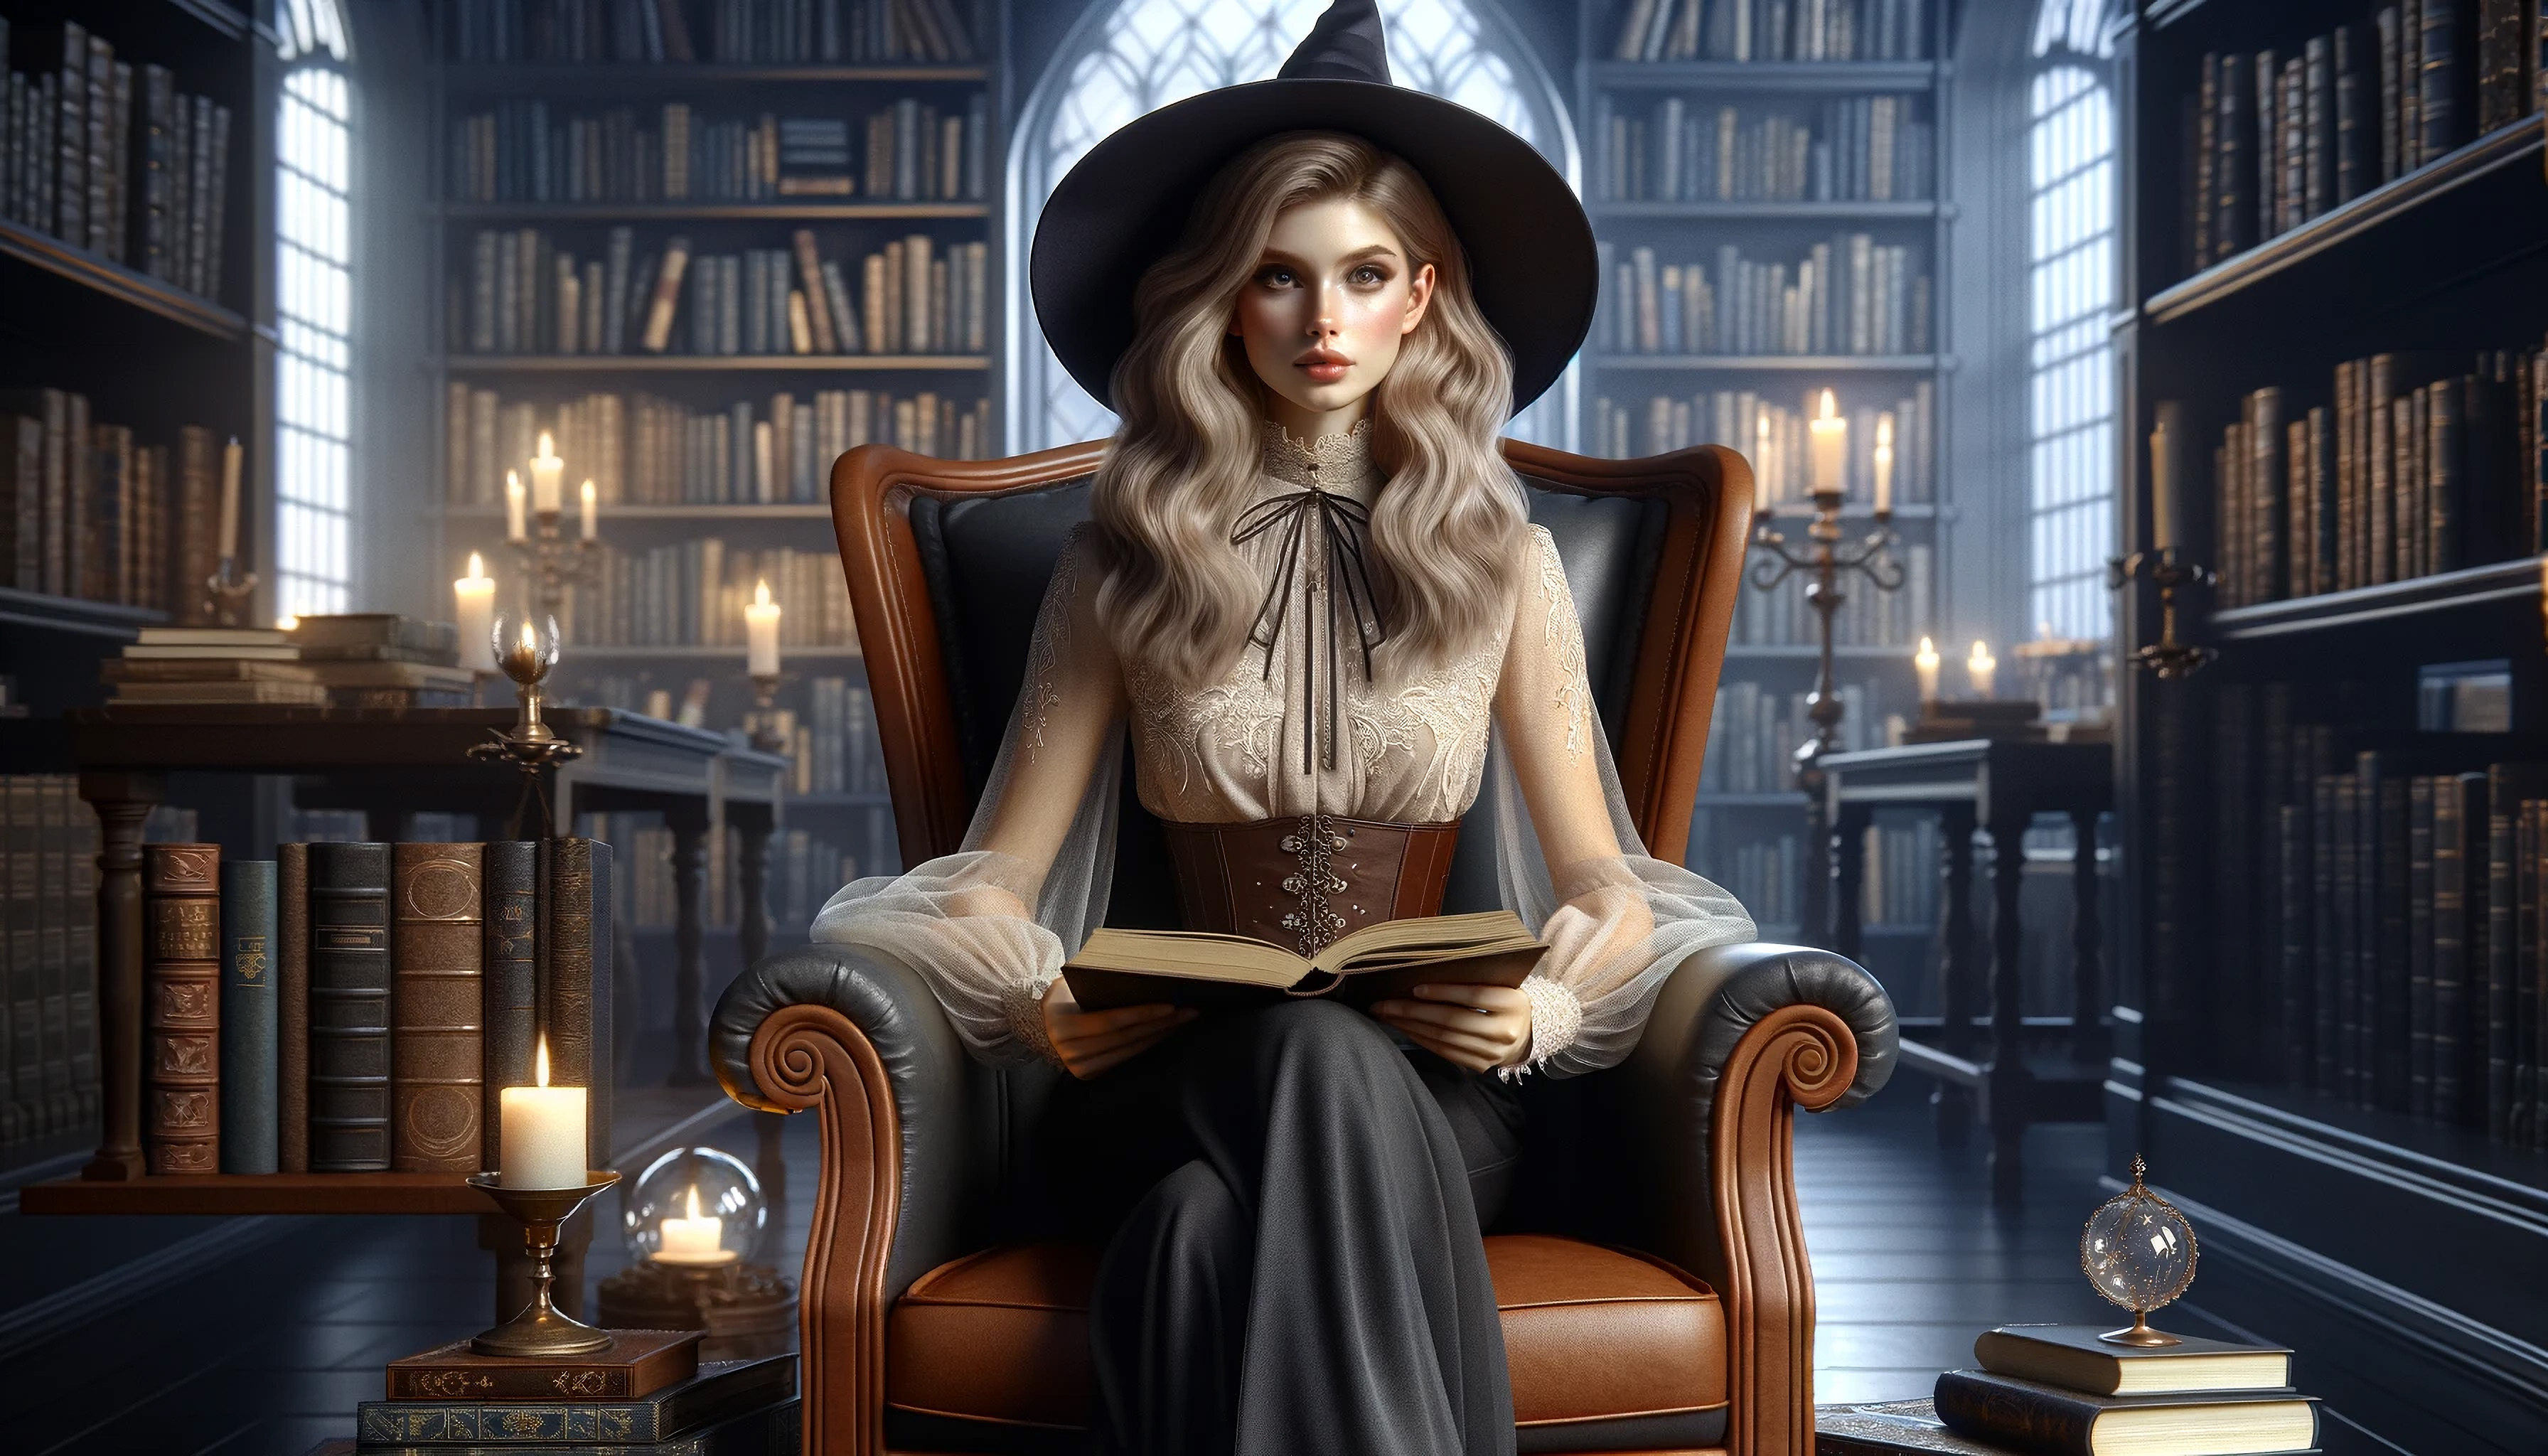 General 3584x2048 AI art digital art witch library wizard wizard's hat wizarding world armchair book in hand sitting legs crossed books fire looking at viewer wavy hair candles long hair dress closed mouth window